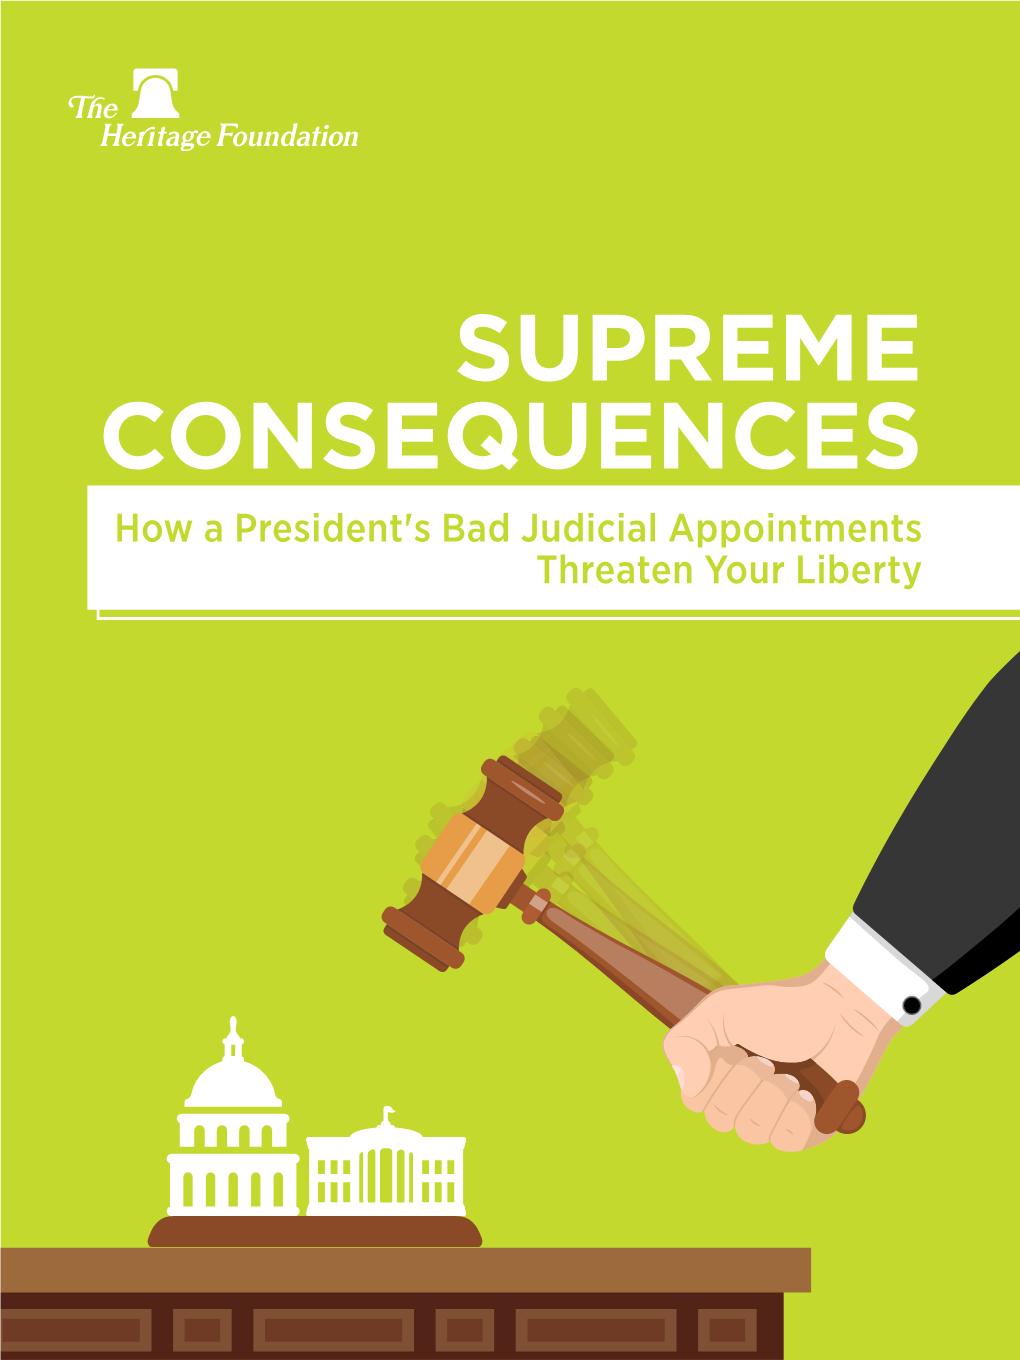 SUPREME CONSEQUENCES How a President's Bad Judicial Appointments Threaten Your Liberty